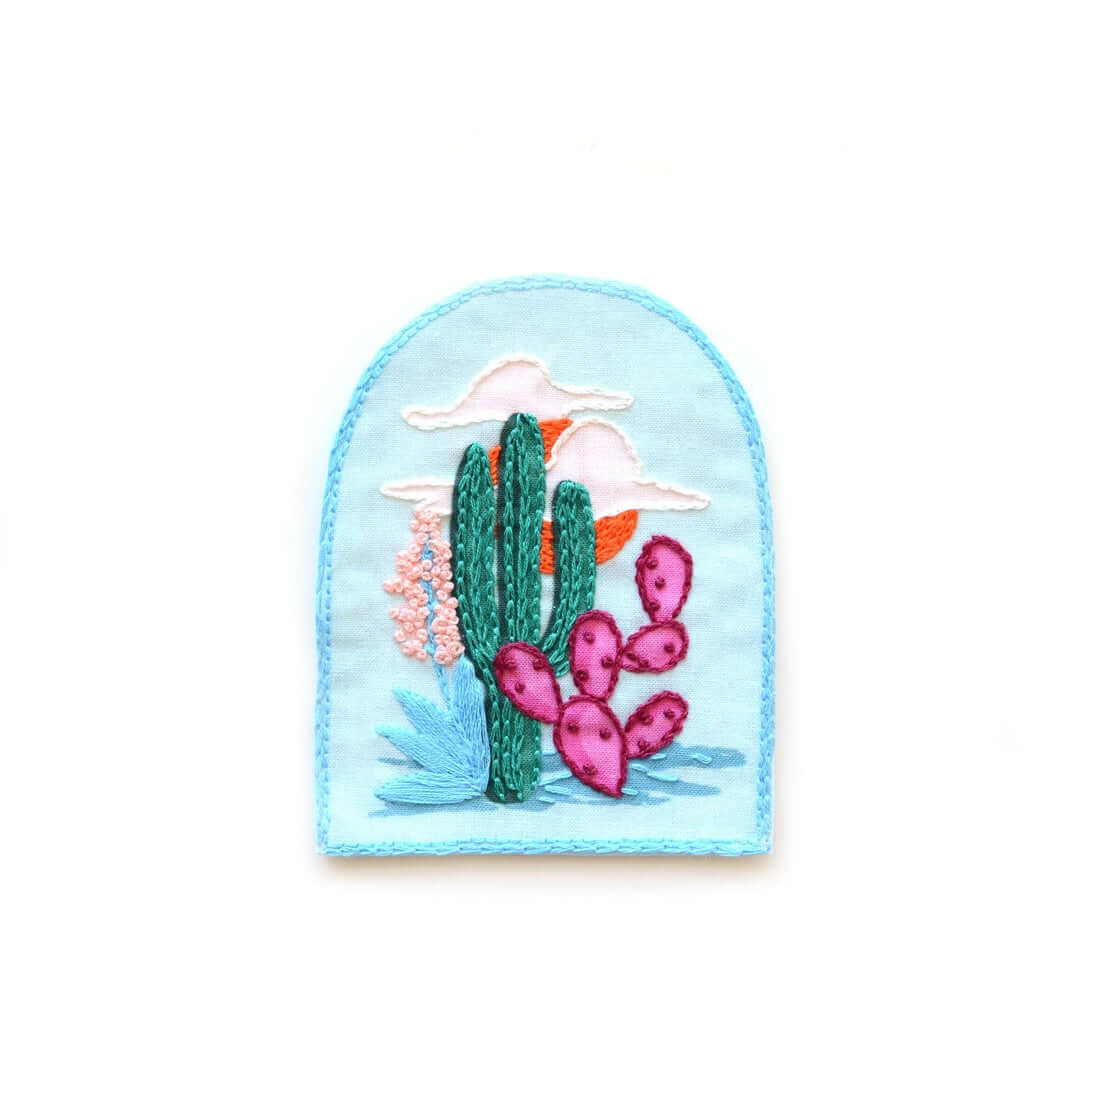 How to hand embroider a cactus patch DIY kit